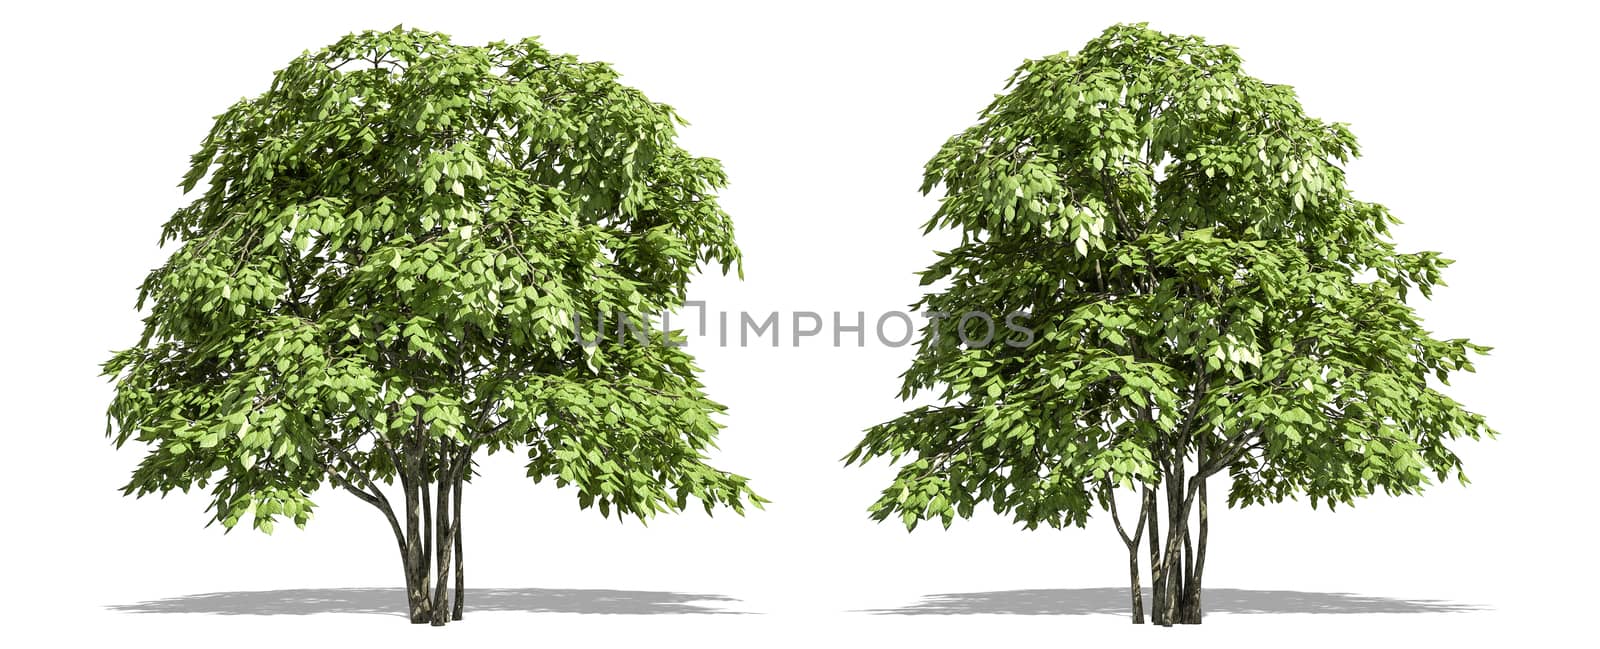 Beautiful Staphyella pinnata tree isolated and cutting on a white background with clipping path. by anotestocker